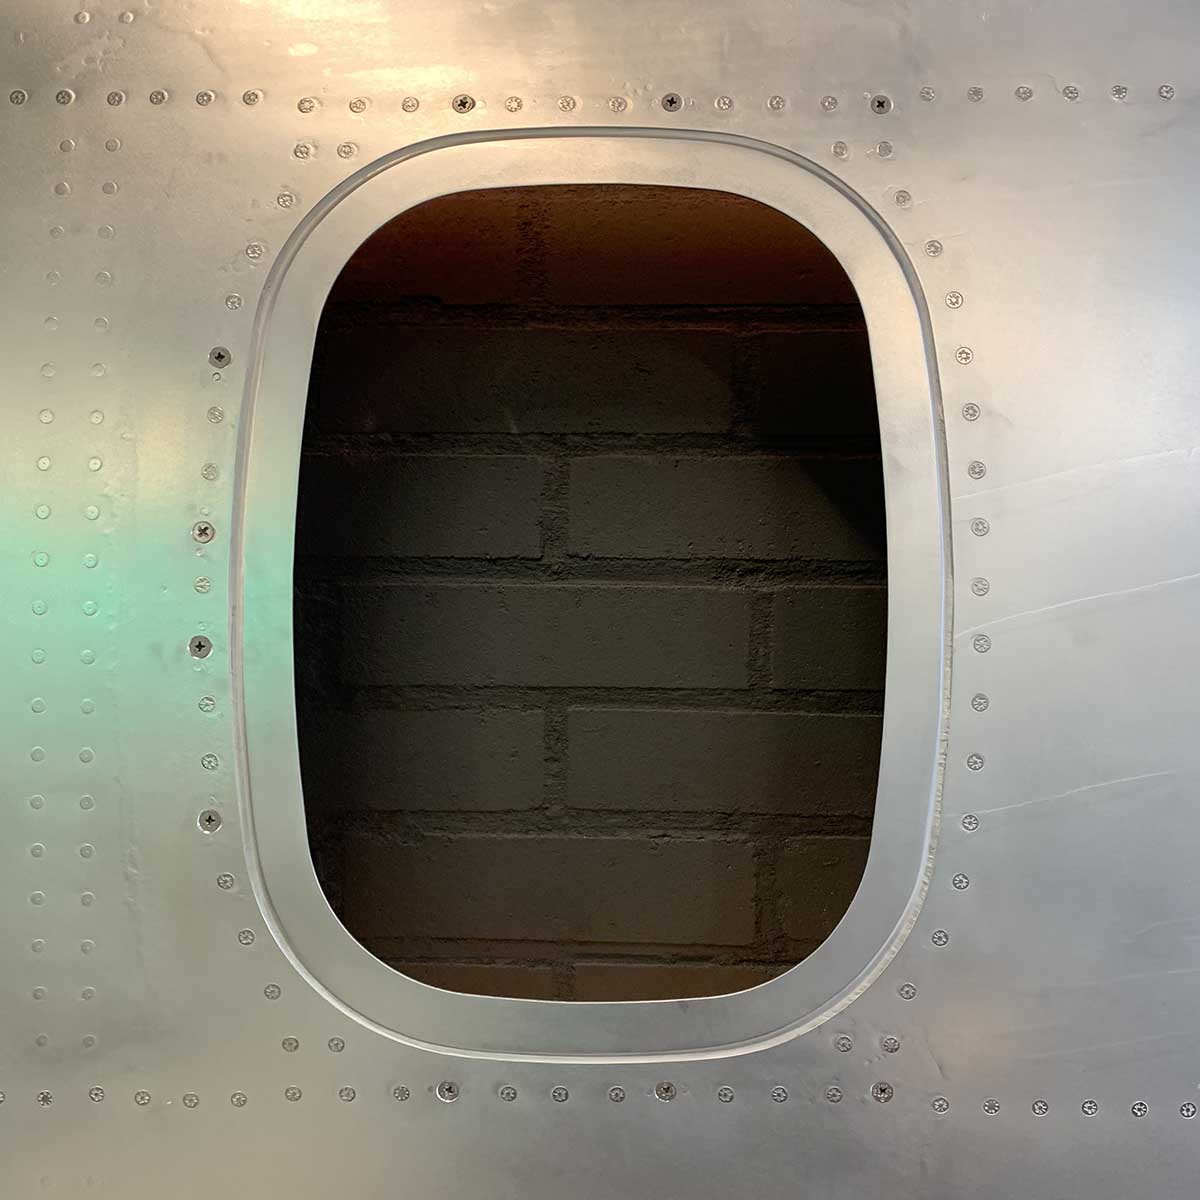 Detail showing one window of a six-window panel of an ATR passenger aircraft turned into a decorative piece.